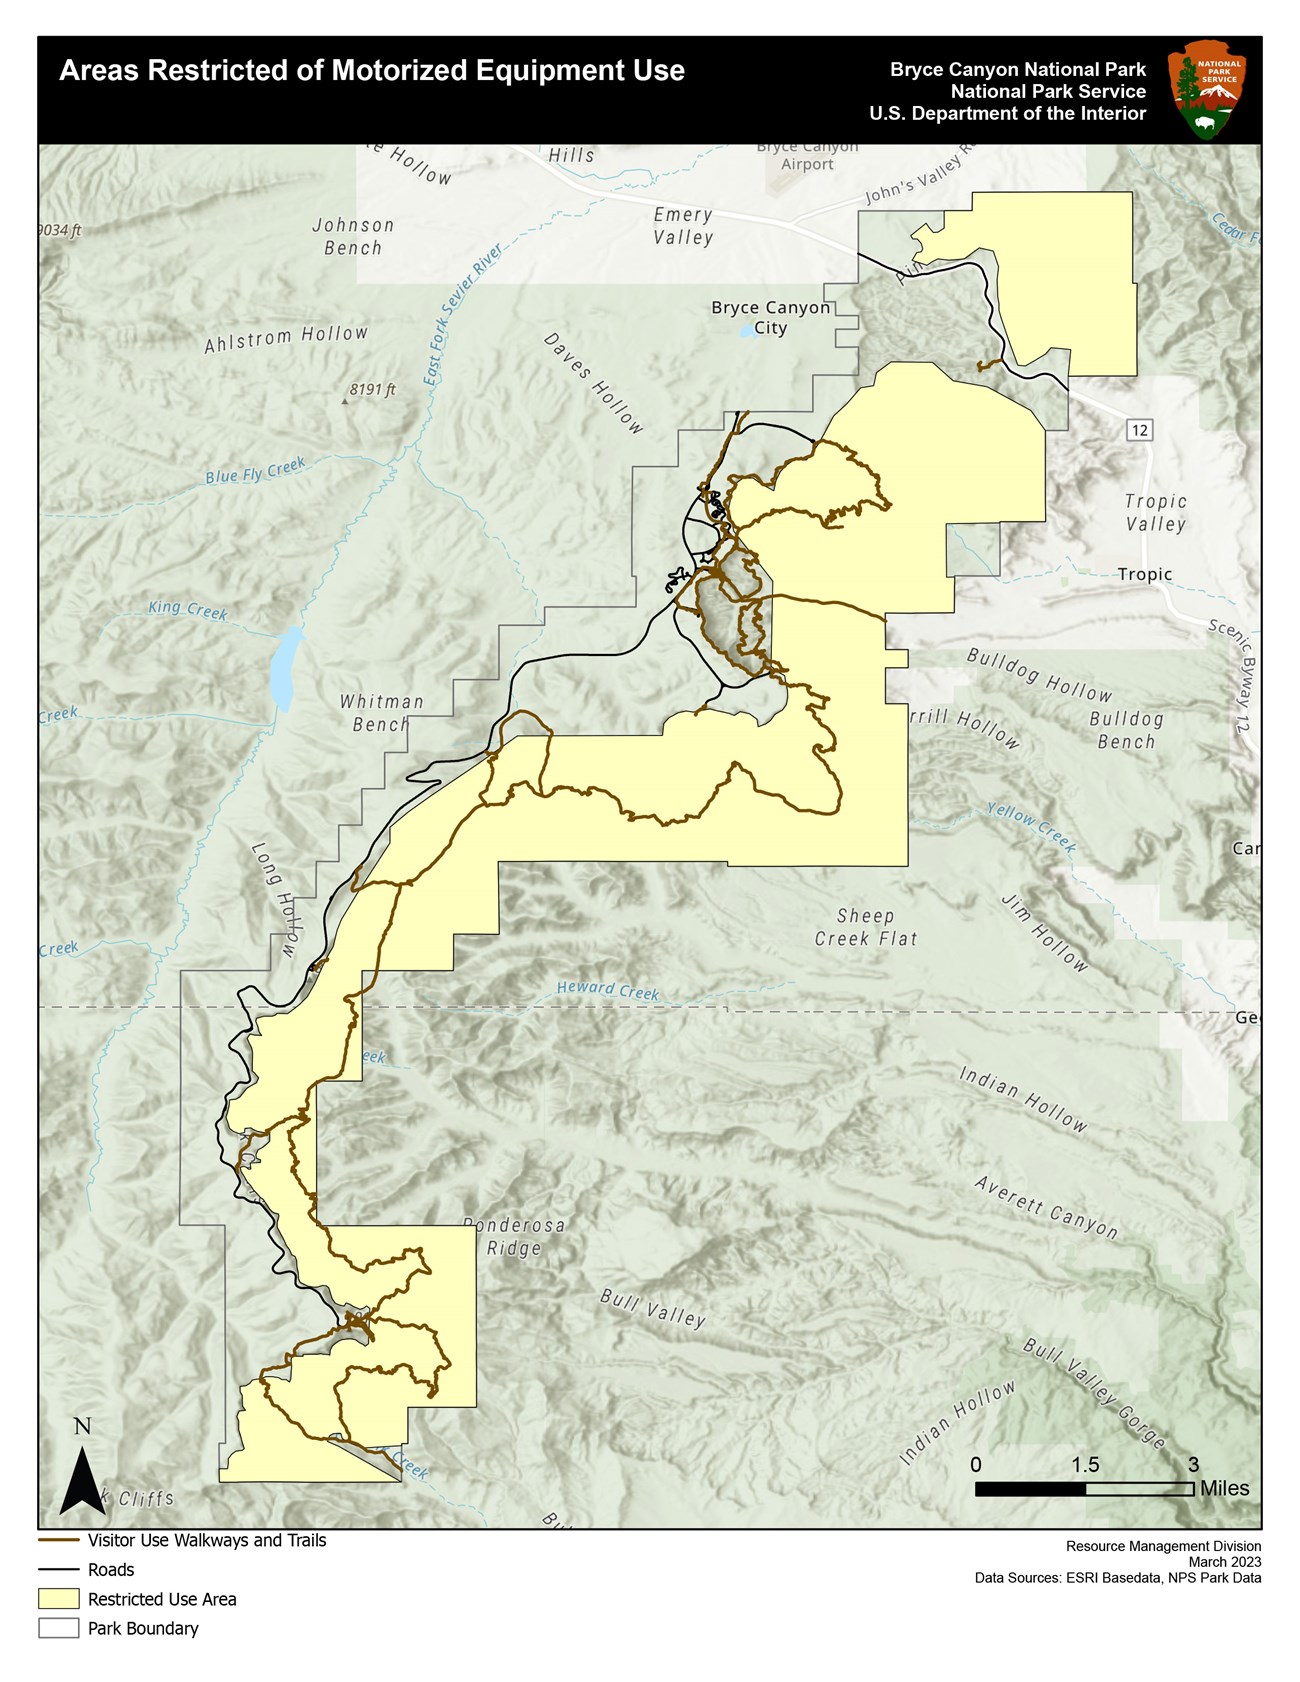 Map showing areas restricted of motorized equipment use. Areas marked in yellow are restricted use areas.